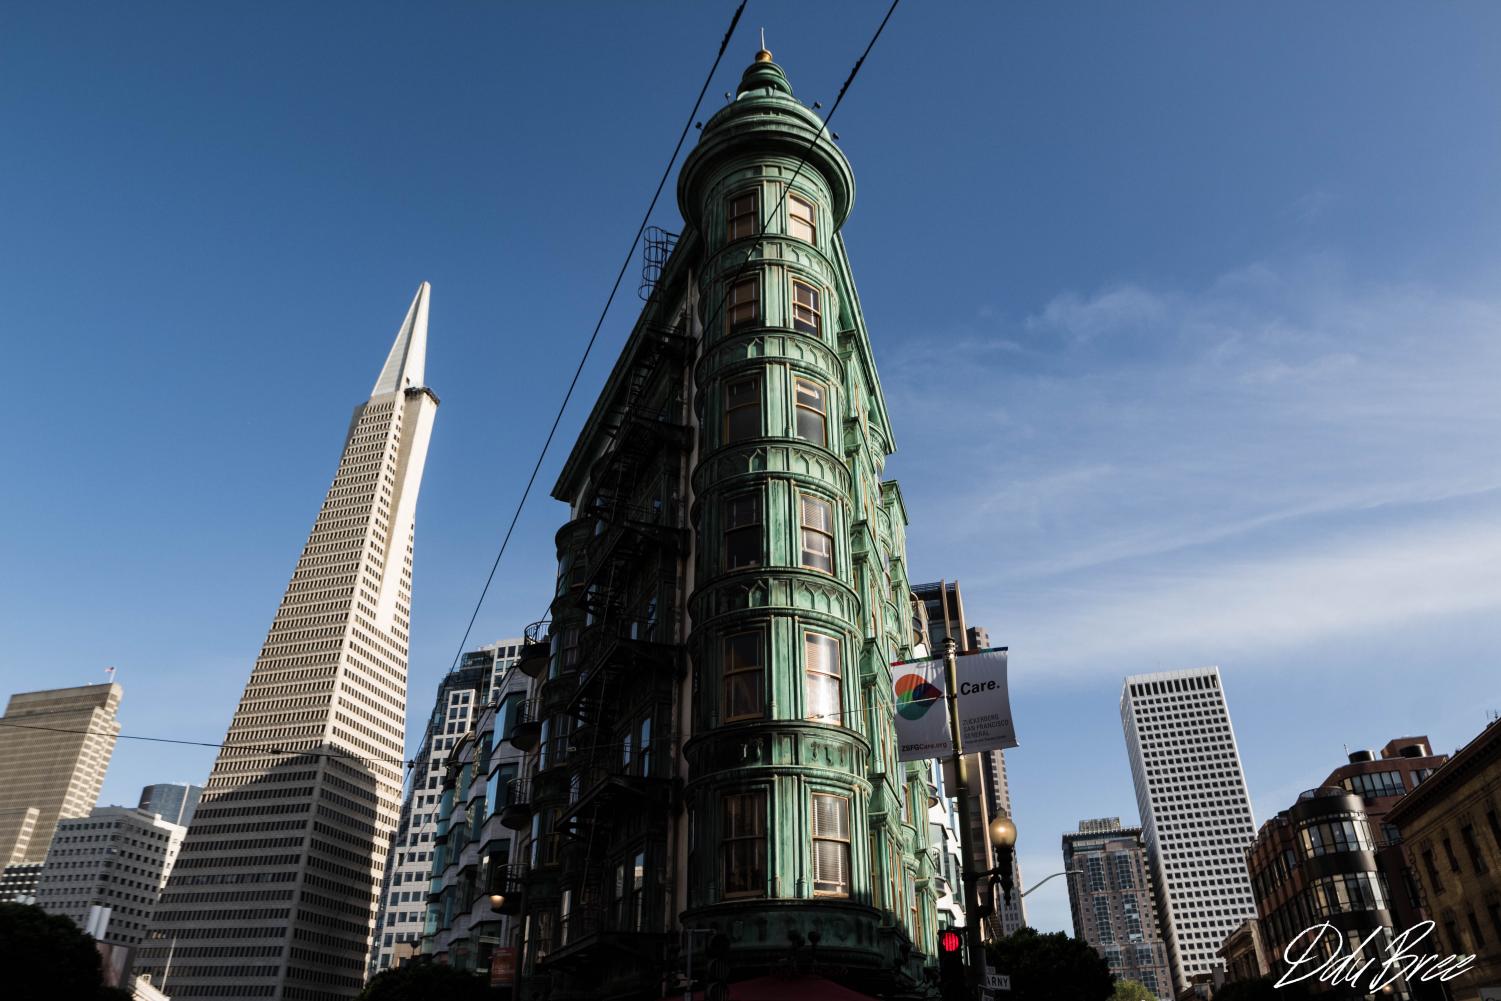 New+places%2C+new+adventures+%28San+Francisco+photo+gallery+by+Devon+DuBree%29